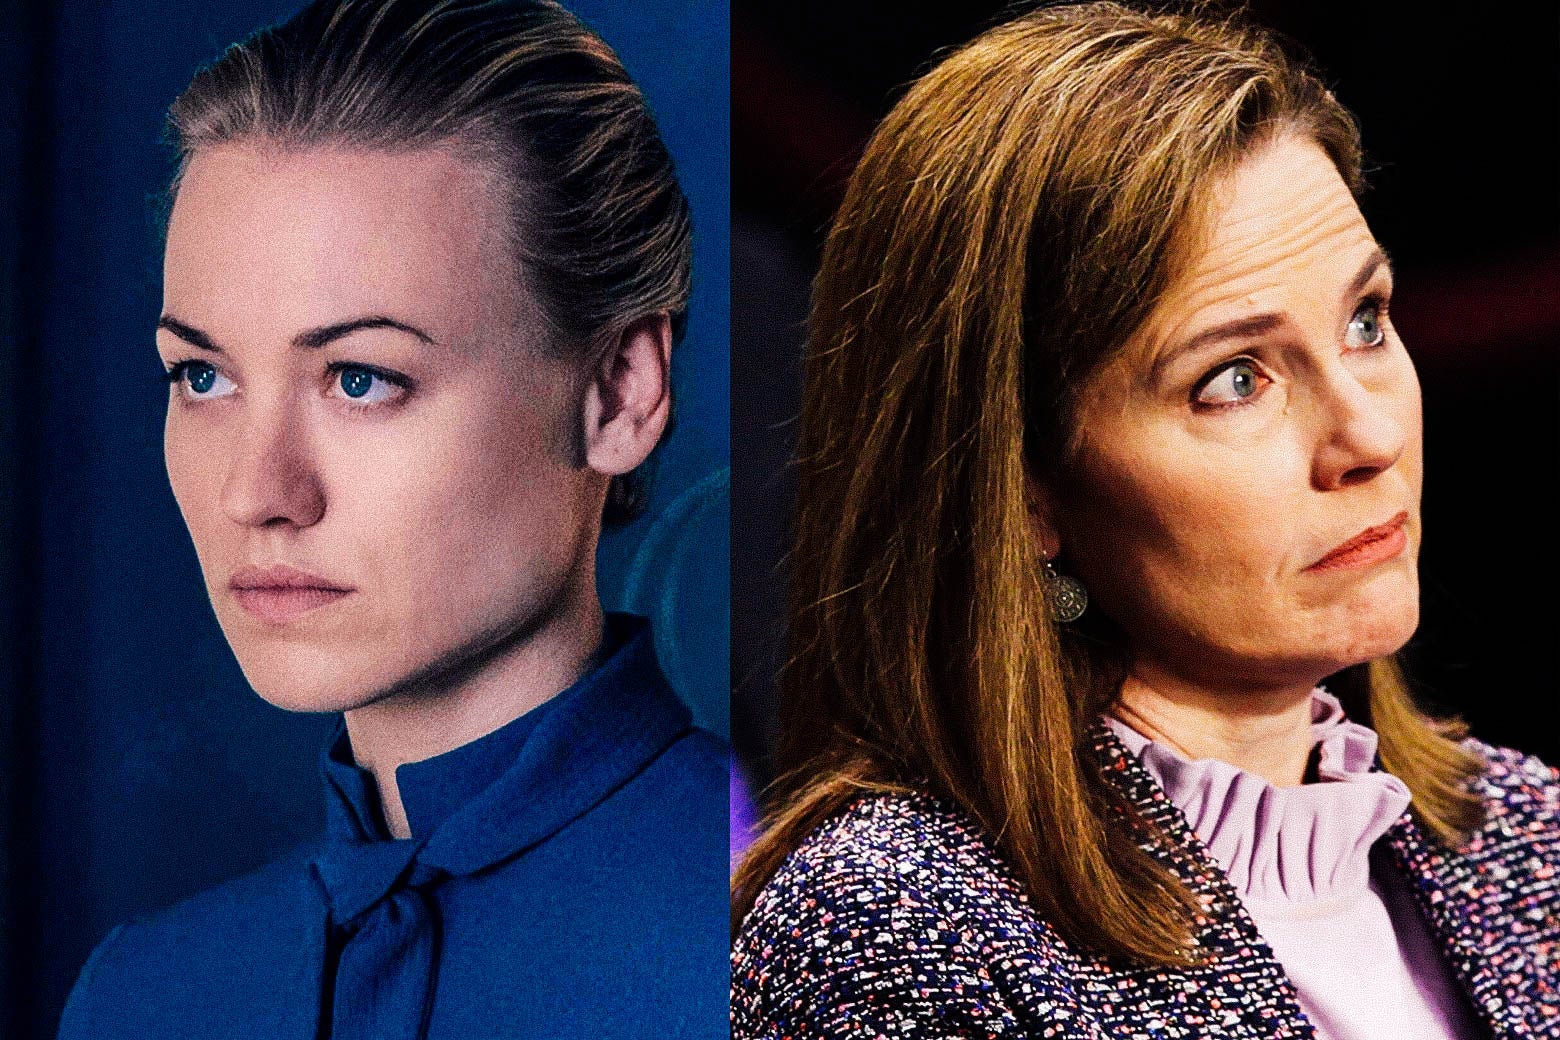 Diptych of Yvonne Strahovski looking stern as Serena Waterford and Amy Coney Barrett at her confirmation hearing